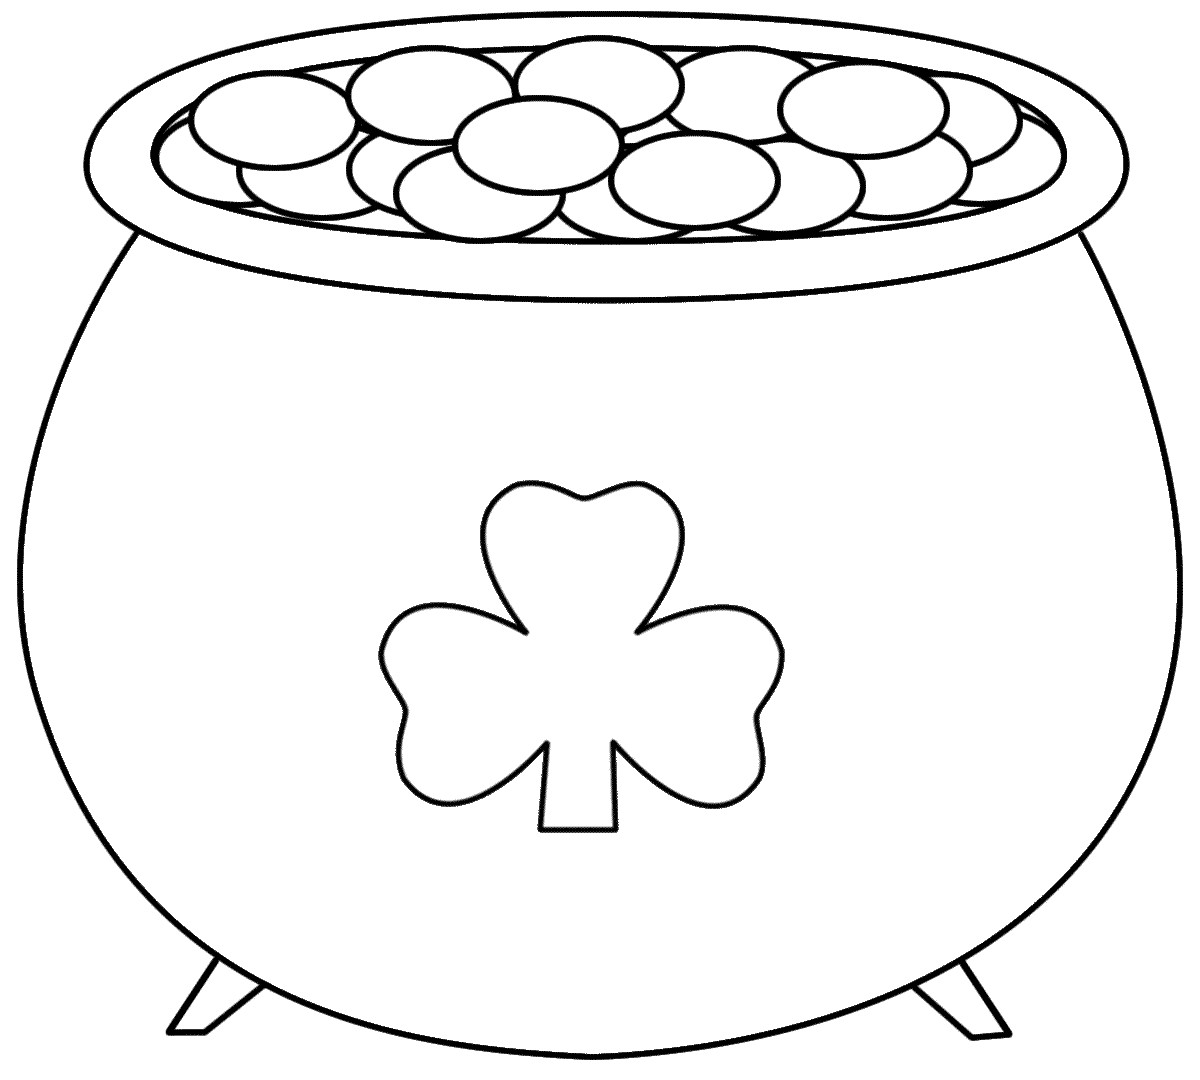 Printable St Patrick Day Coloring Pages
 St Patrick’s Day Coloring Pages